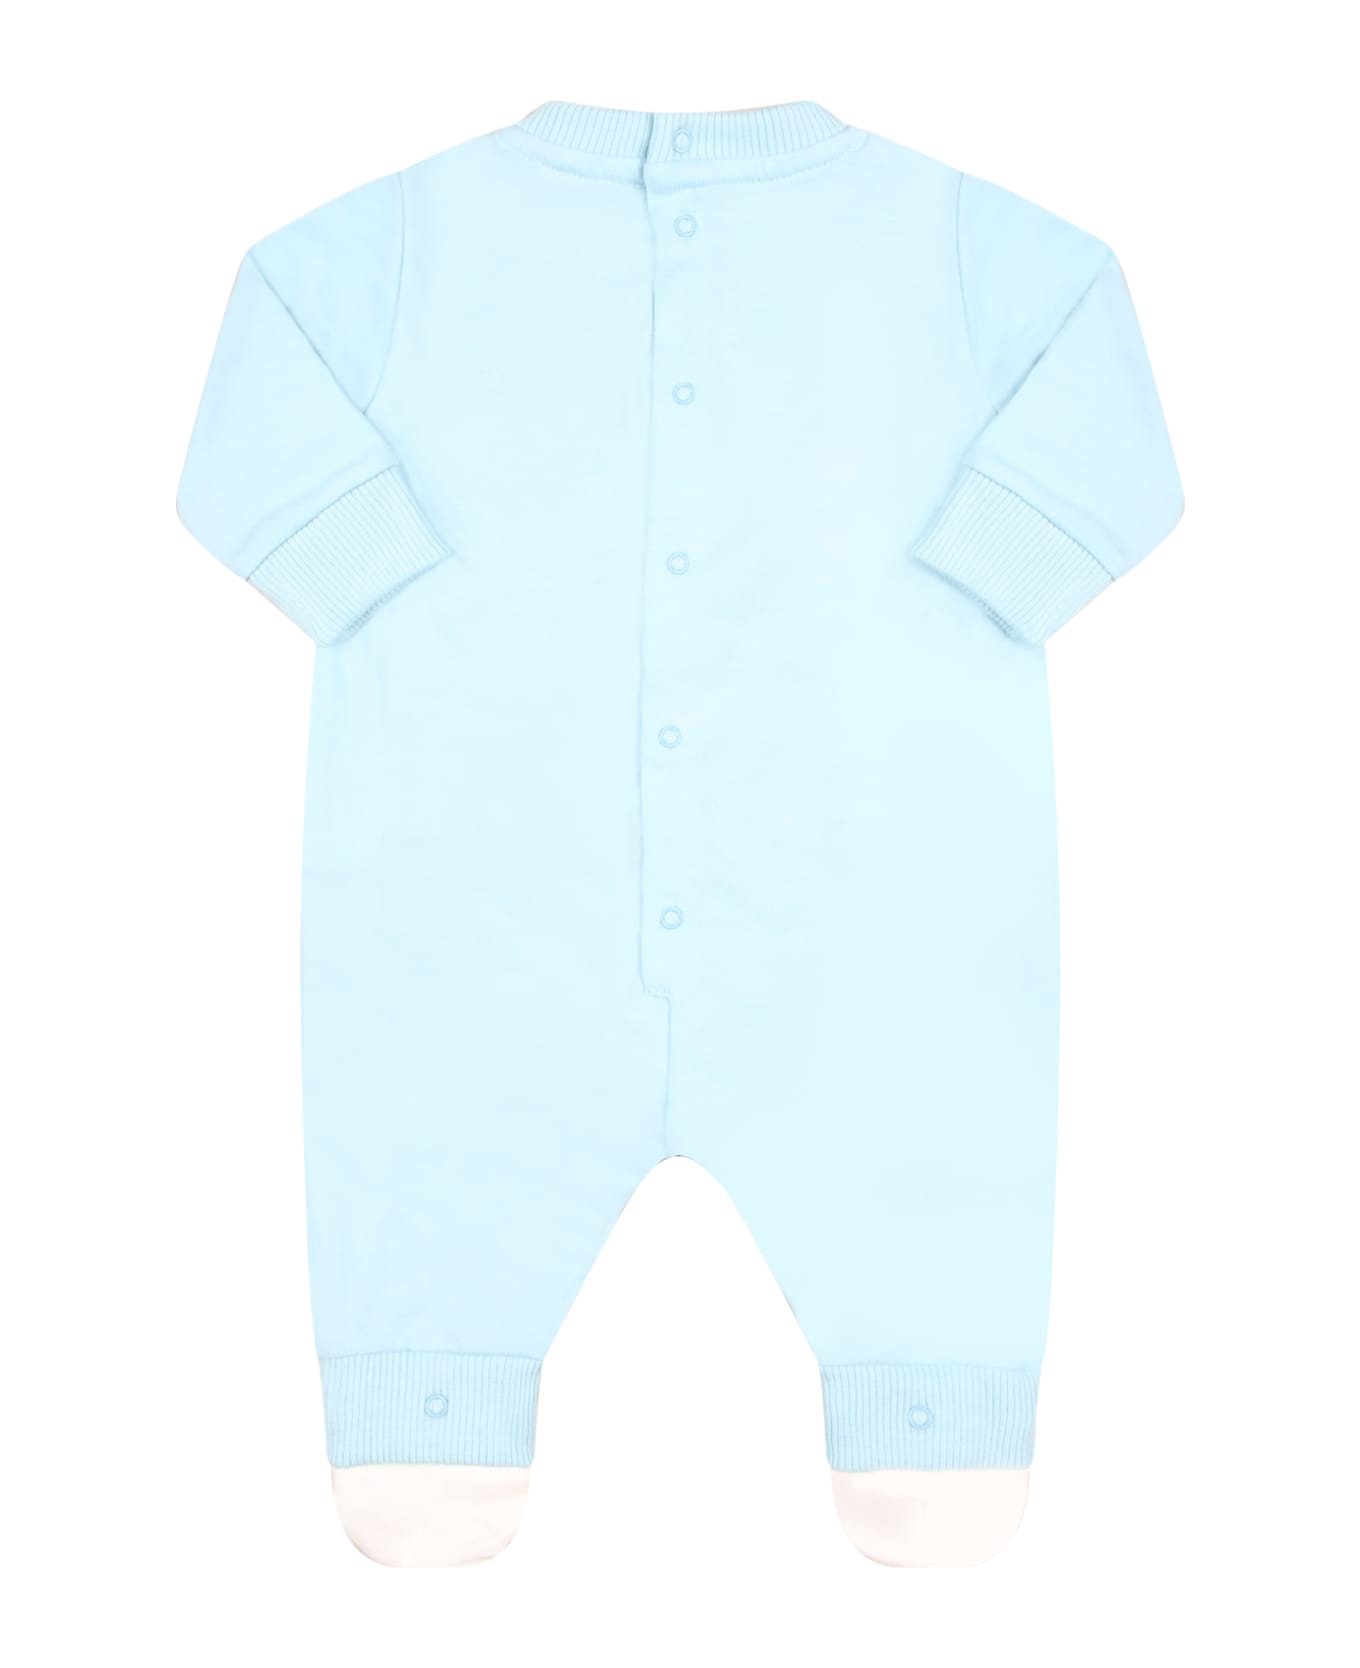 Moschino Light Blue Jumpsuit For Baby Boy With Teddy Bear - Light Blue